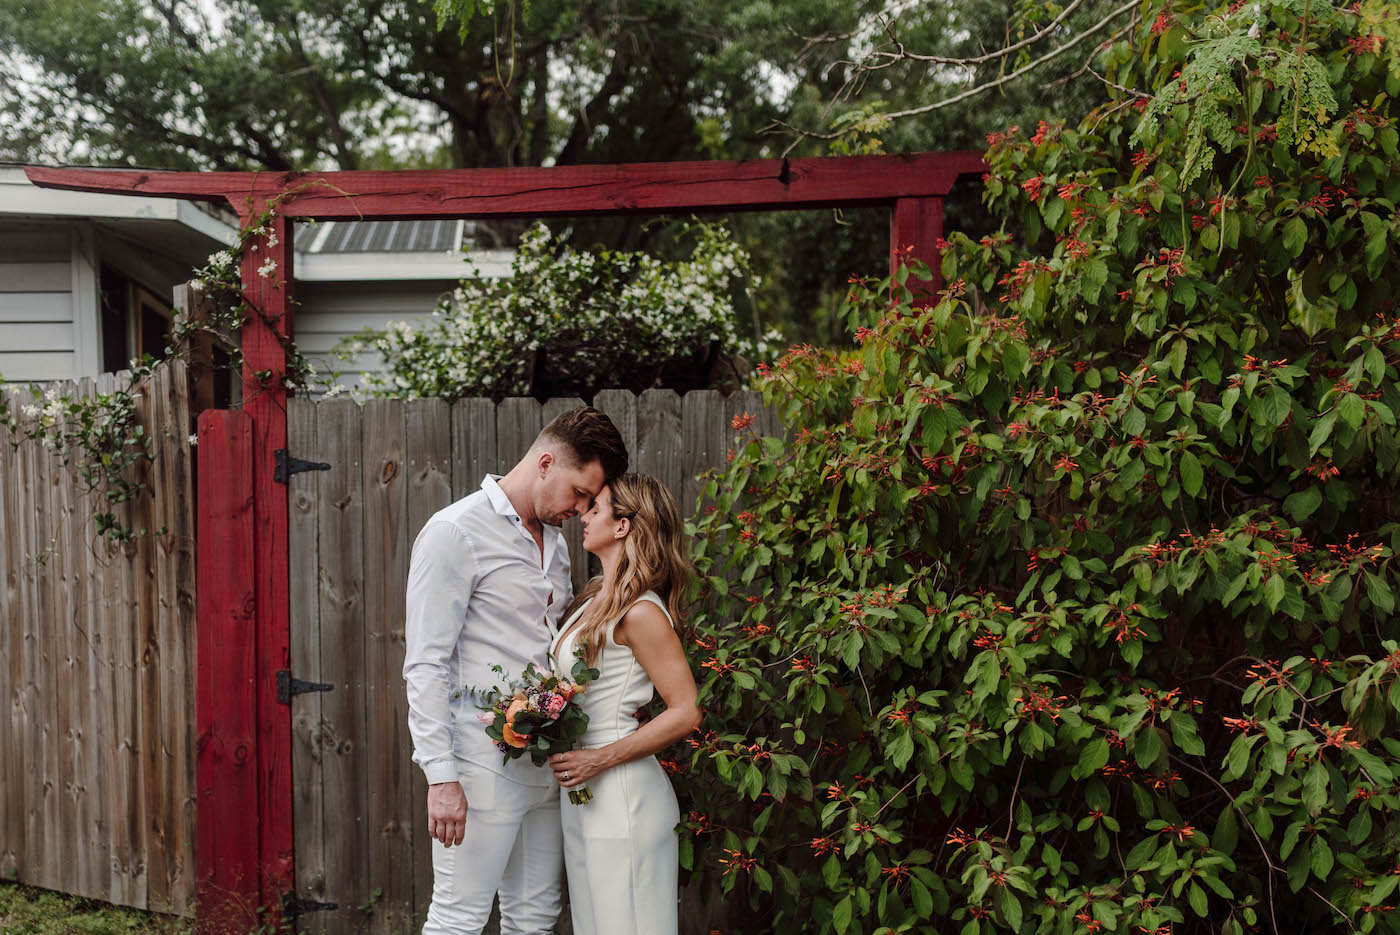 Bride and Groom Outdoor Wedding Portrait | COVID Wedding Elopement Backyard Ceremony | Ivory White Bridal Jumpsuit | Casual Groom White Shirt and Pants | DIY Pink and Peach Bouquet with Ranunculus and Eucalyptus Greenery